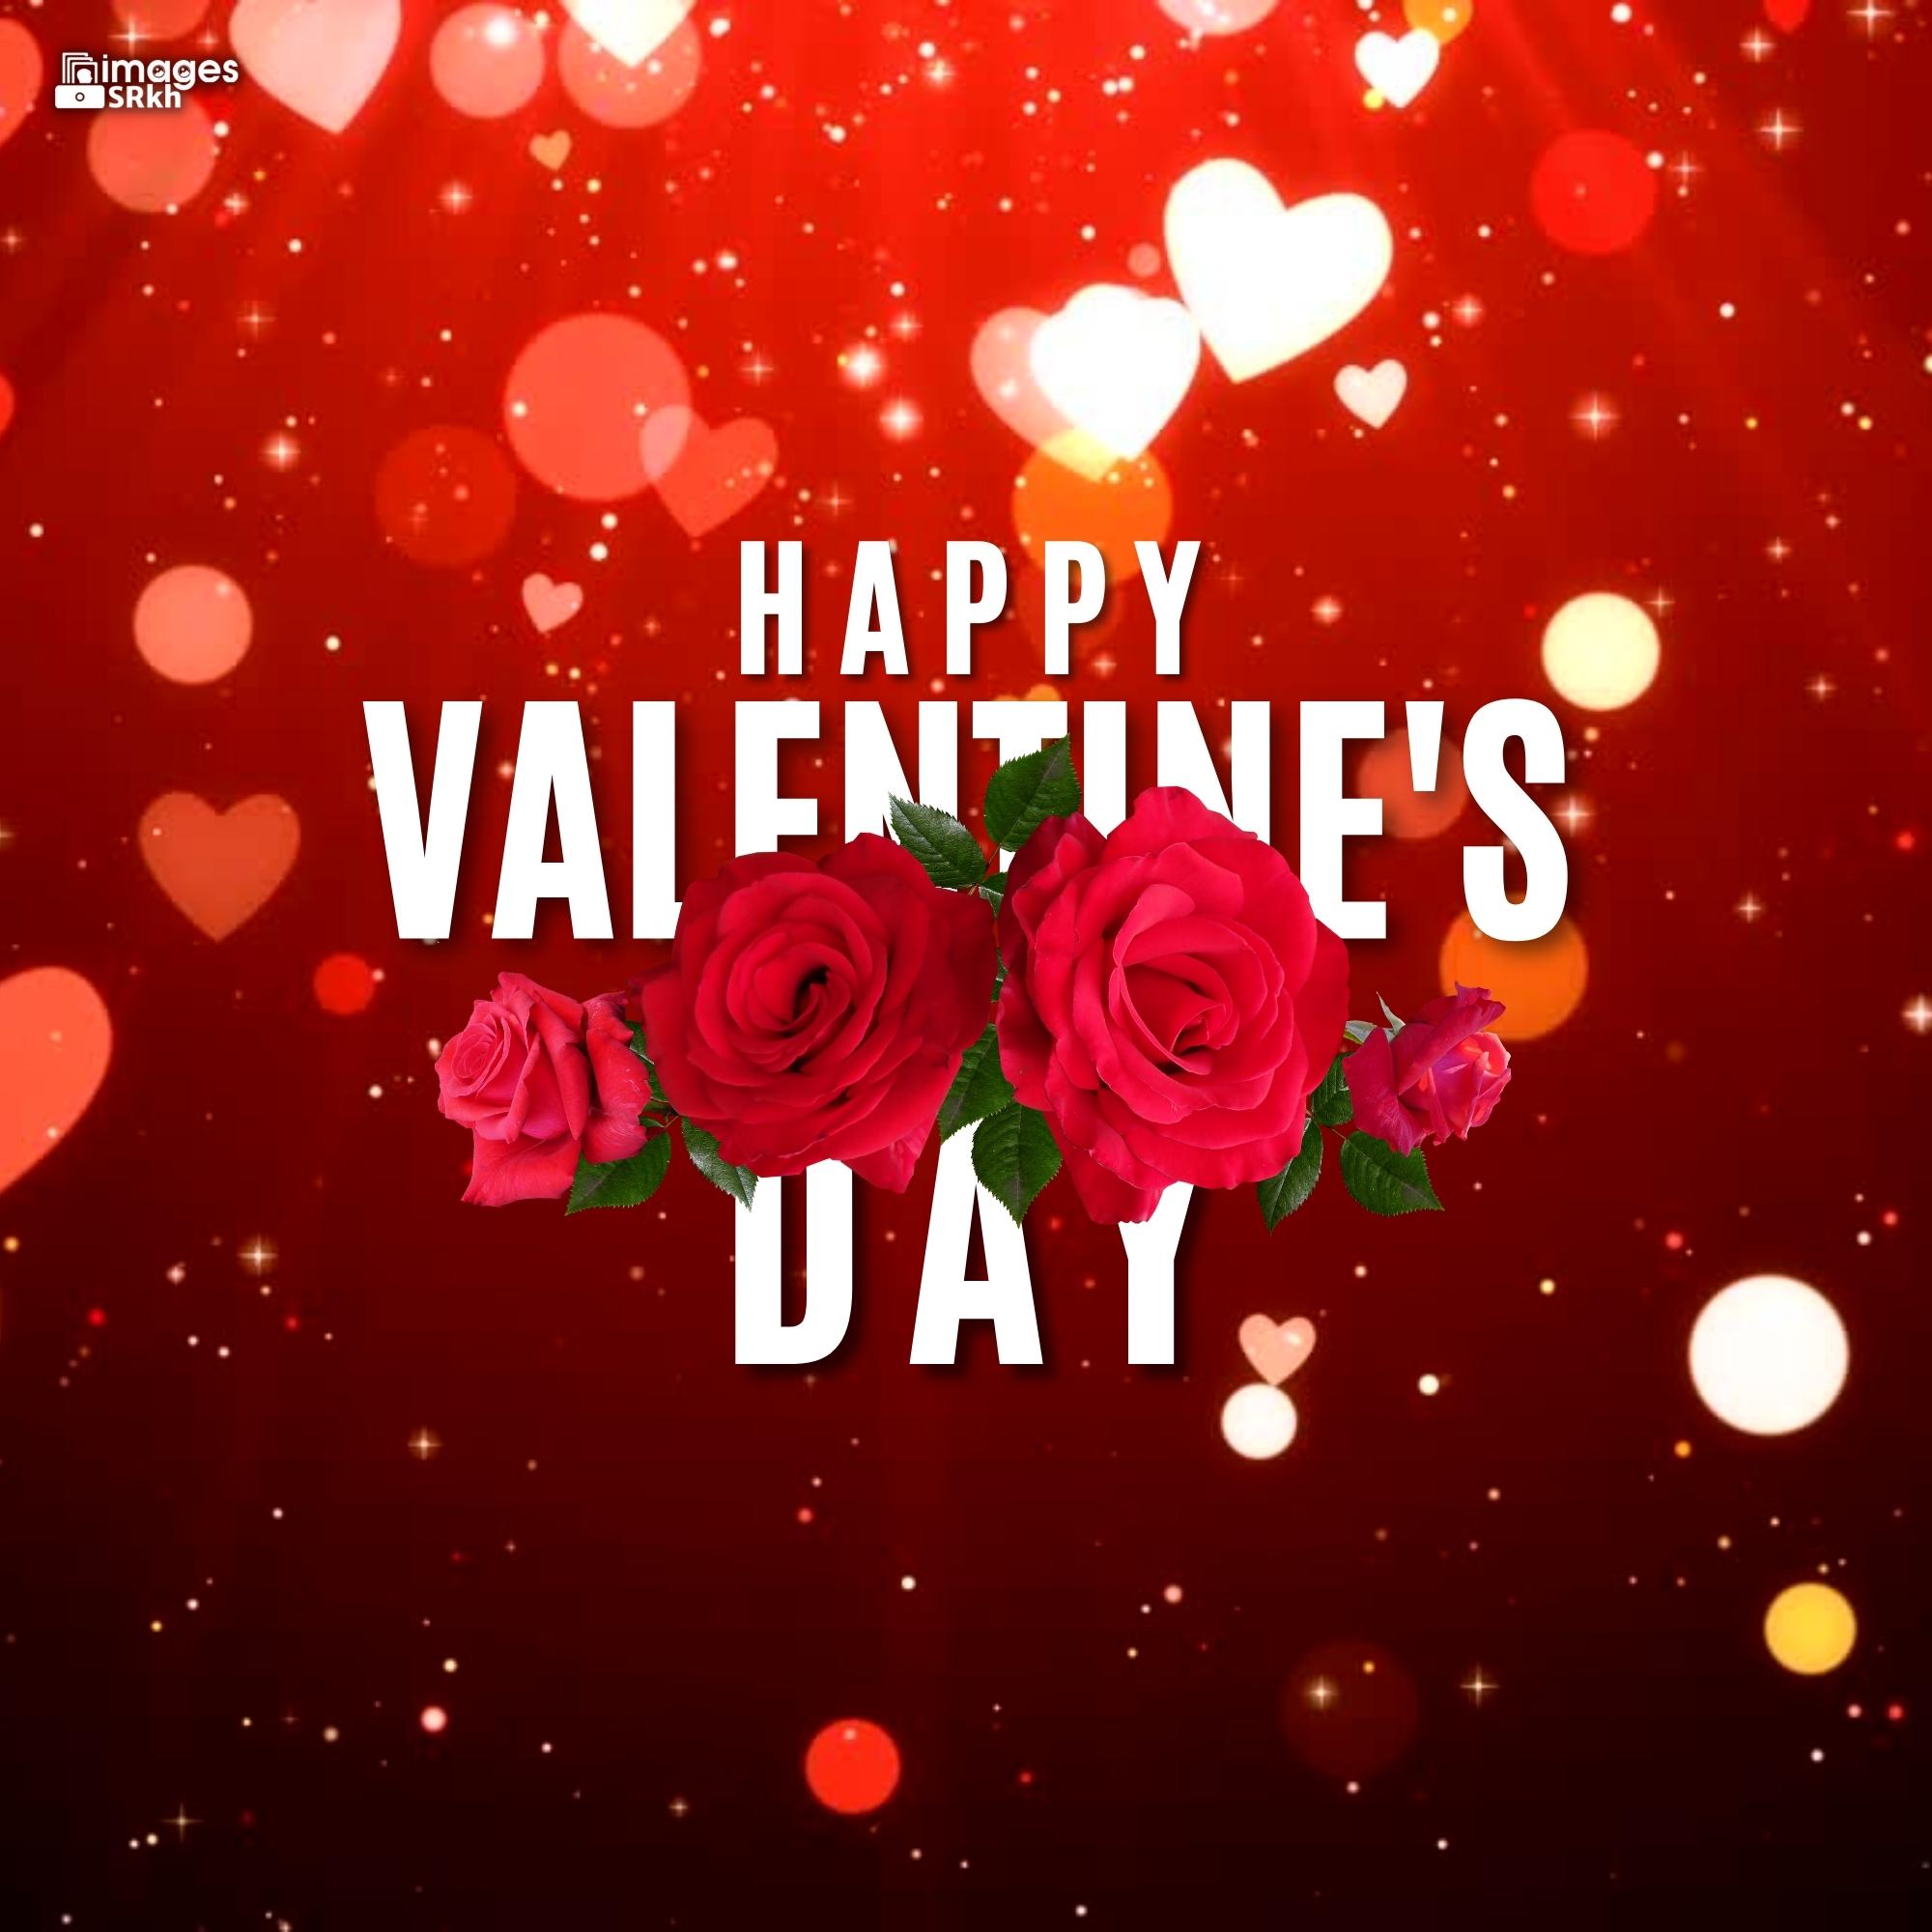 Happy Valentines Day | 479 | PREMIUM IMAGES | Wishes for Love